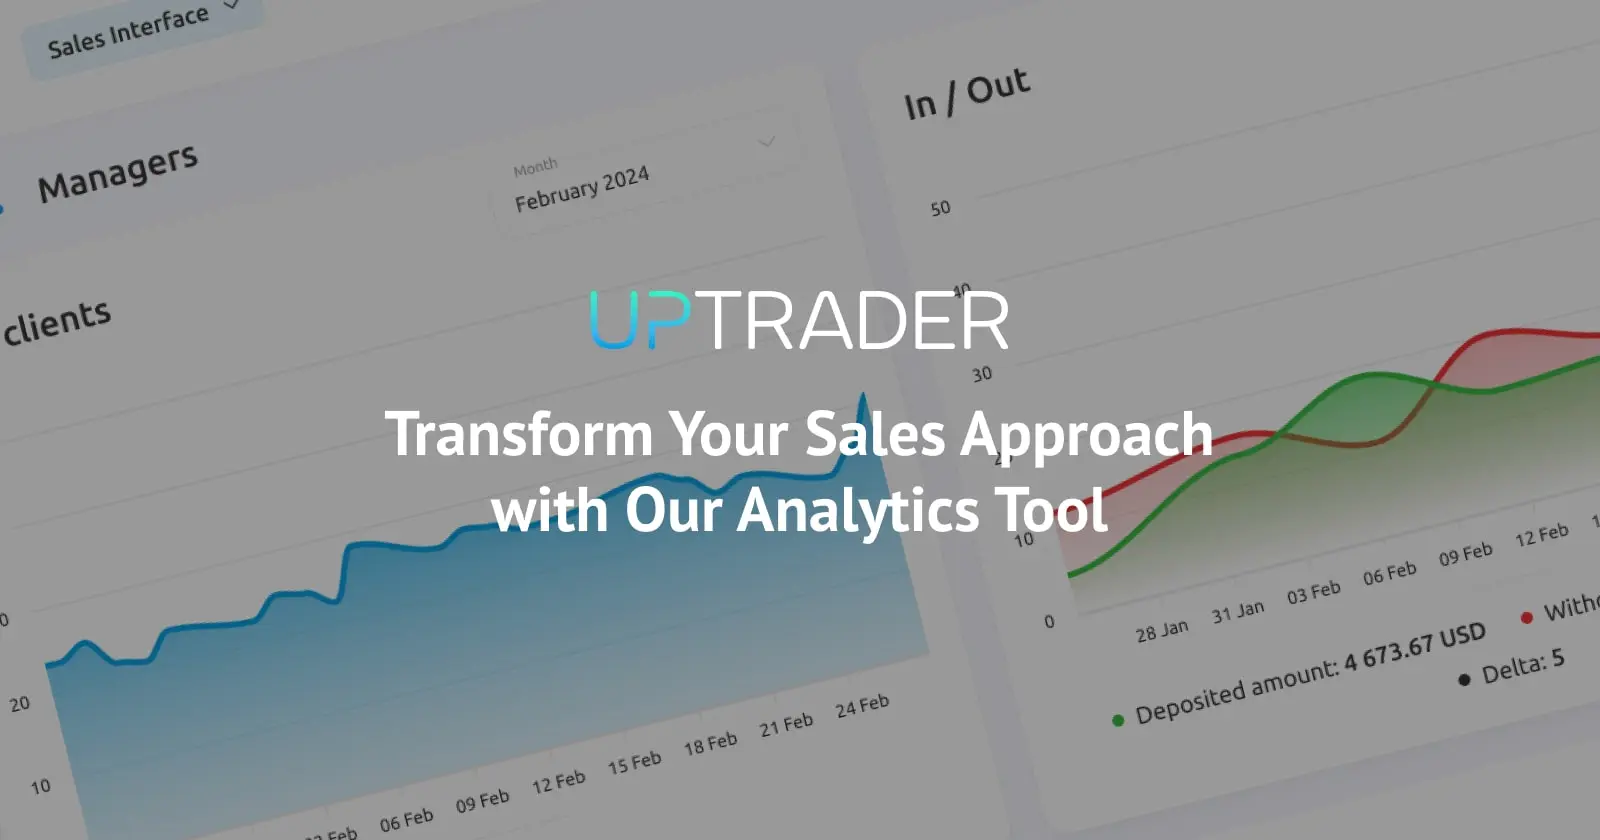 Sales Interface: Unleash the Power of Analytics to Drive Sales